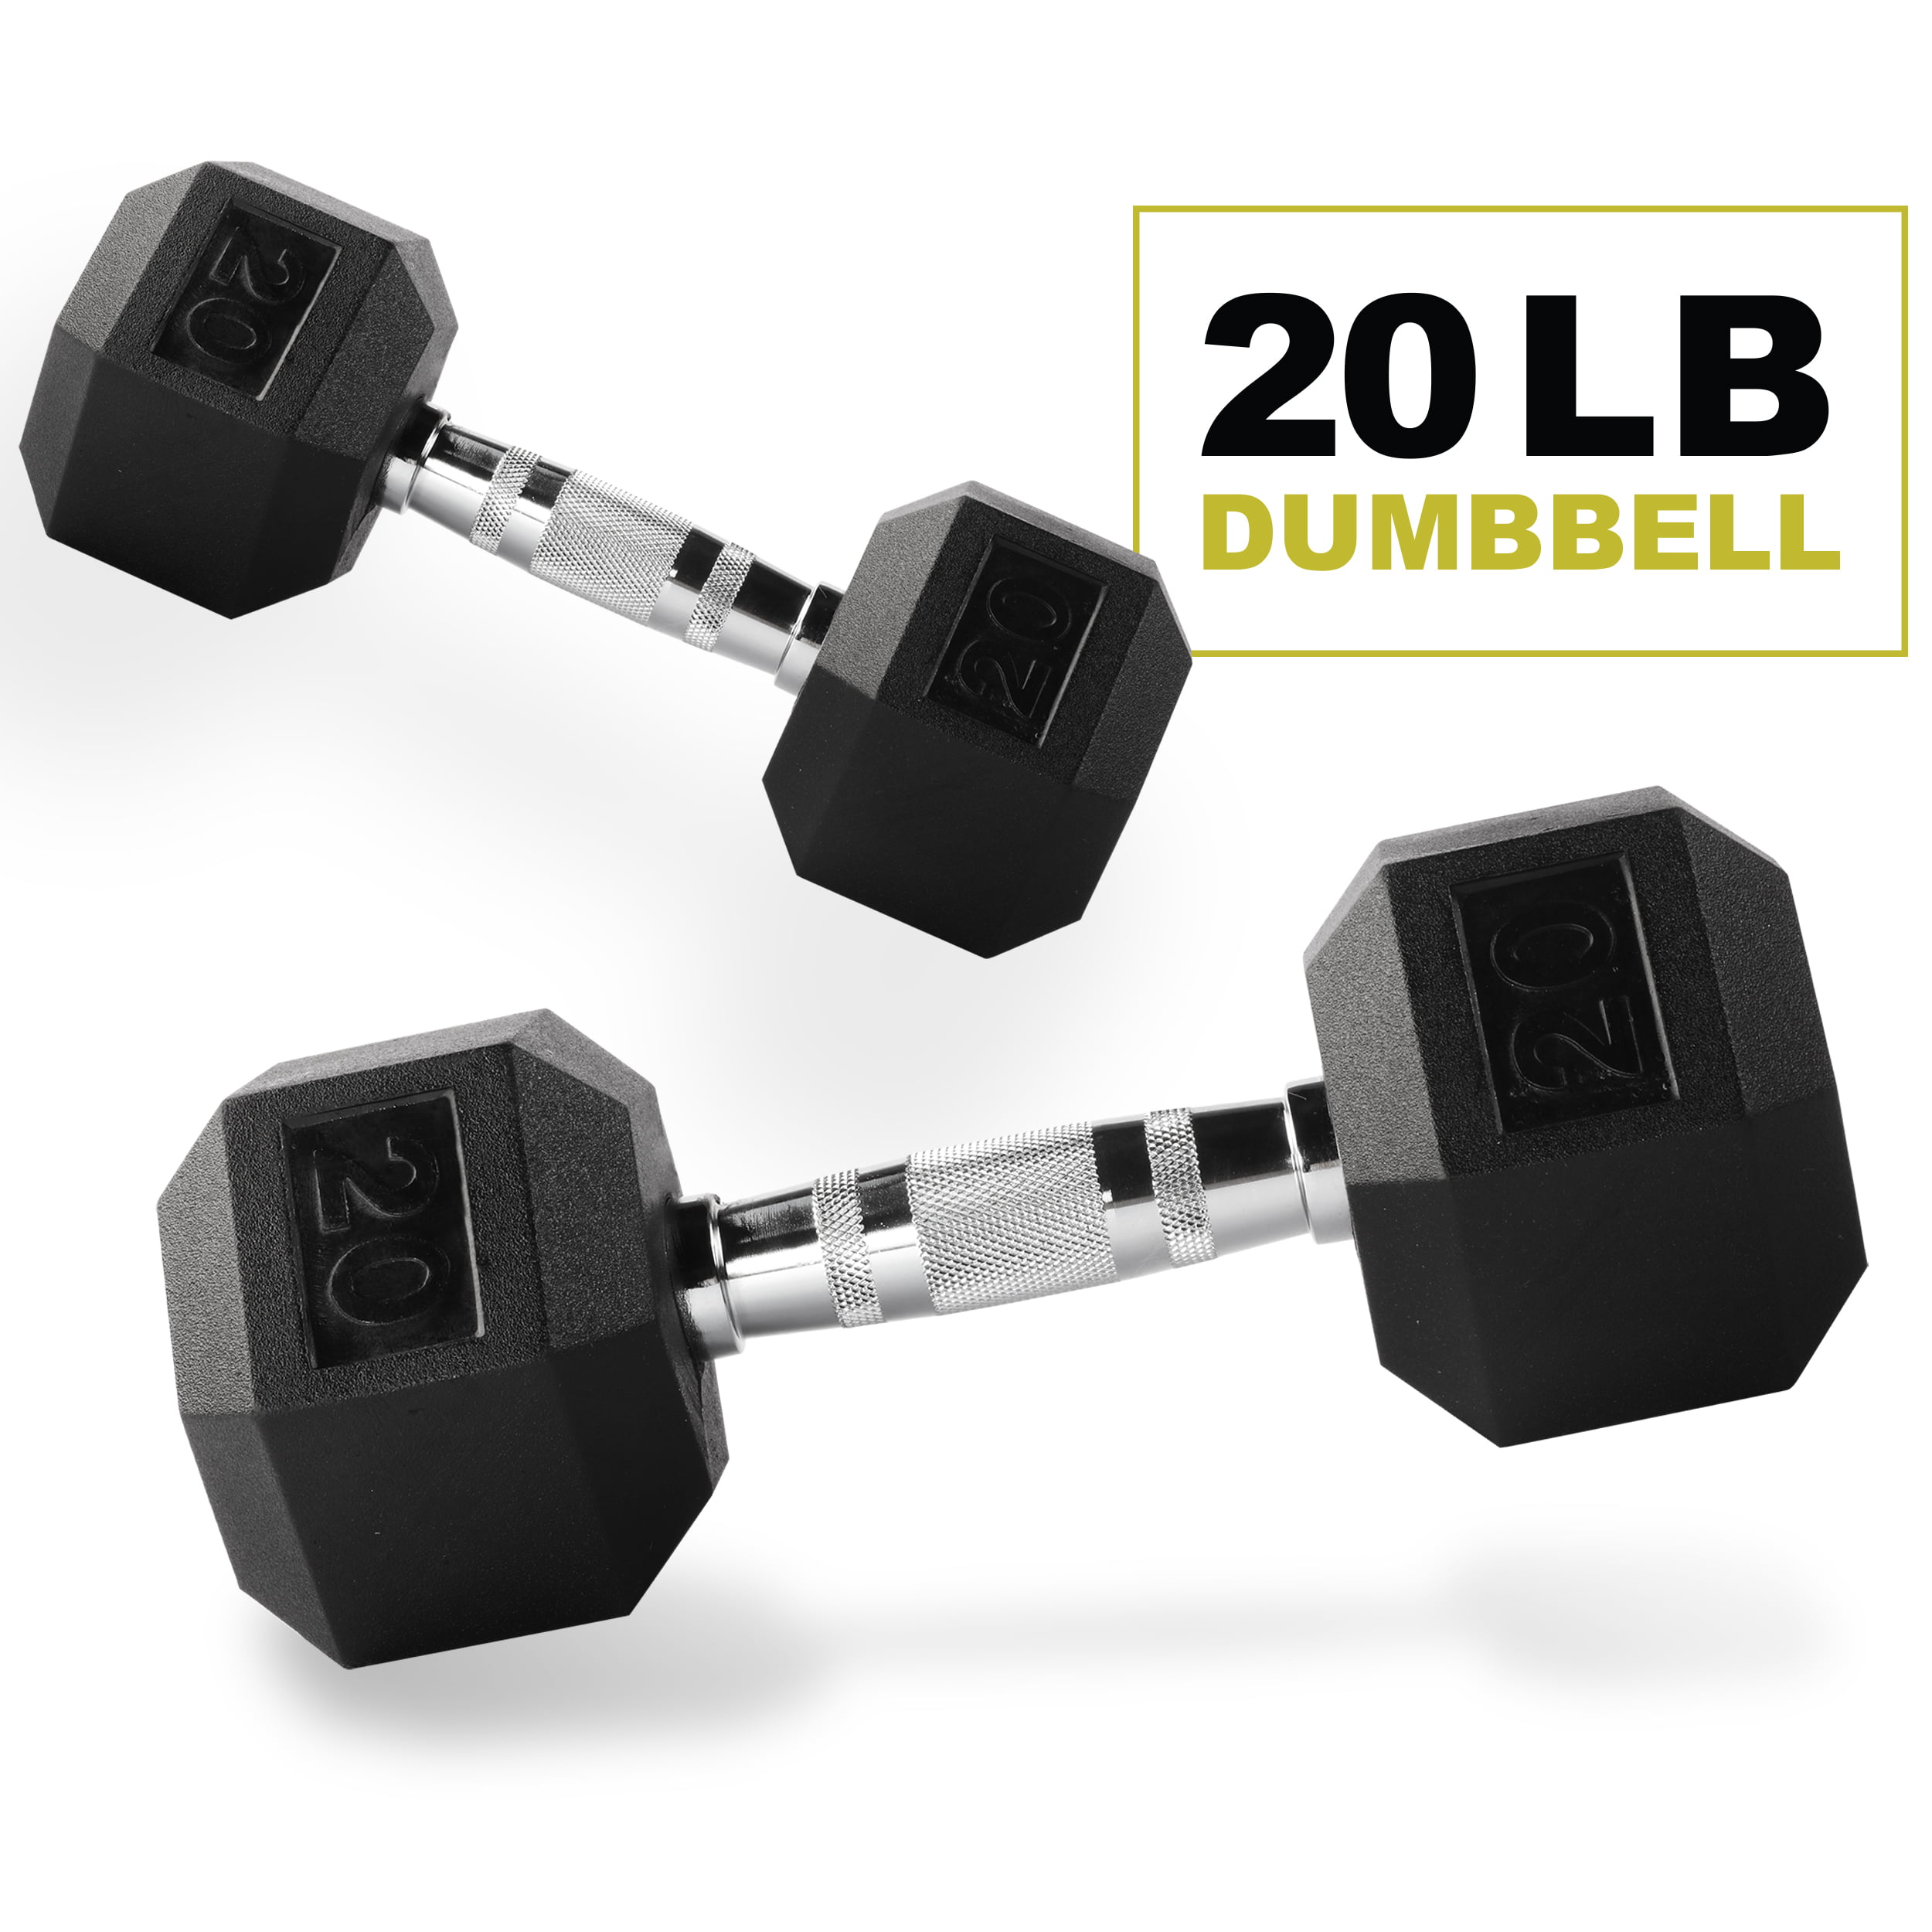 CAP SINGLE 20LB RUBBER COATED HEX DUMBBELL WEIGHT 20 POUND LB FAST SHIPPING 